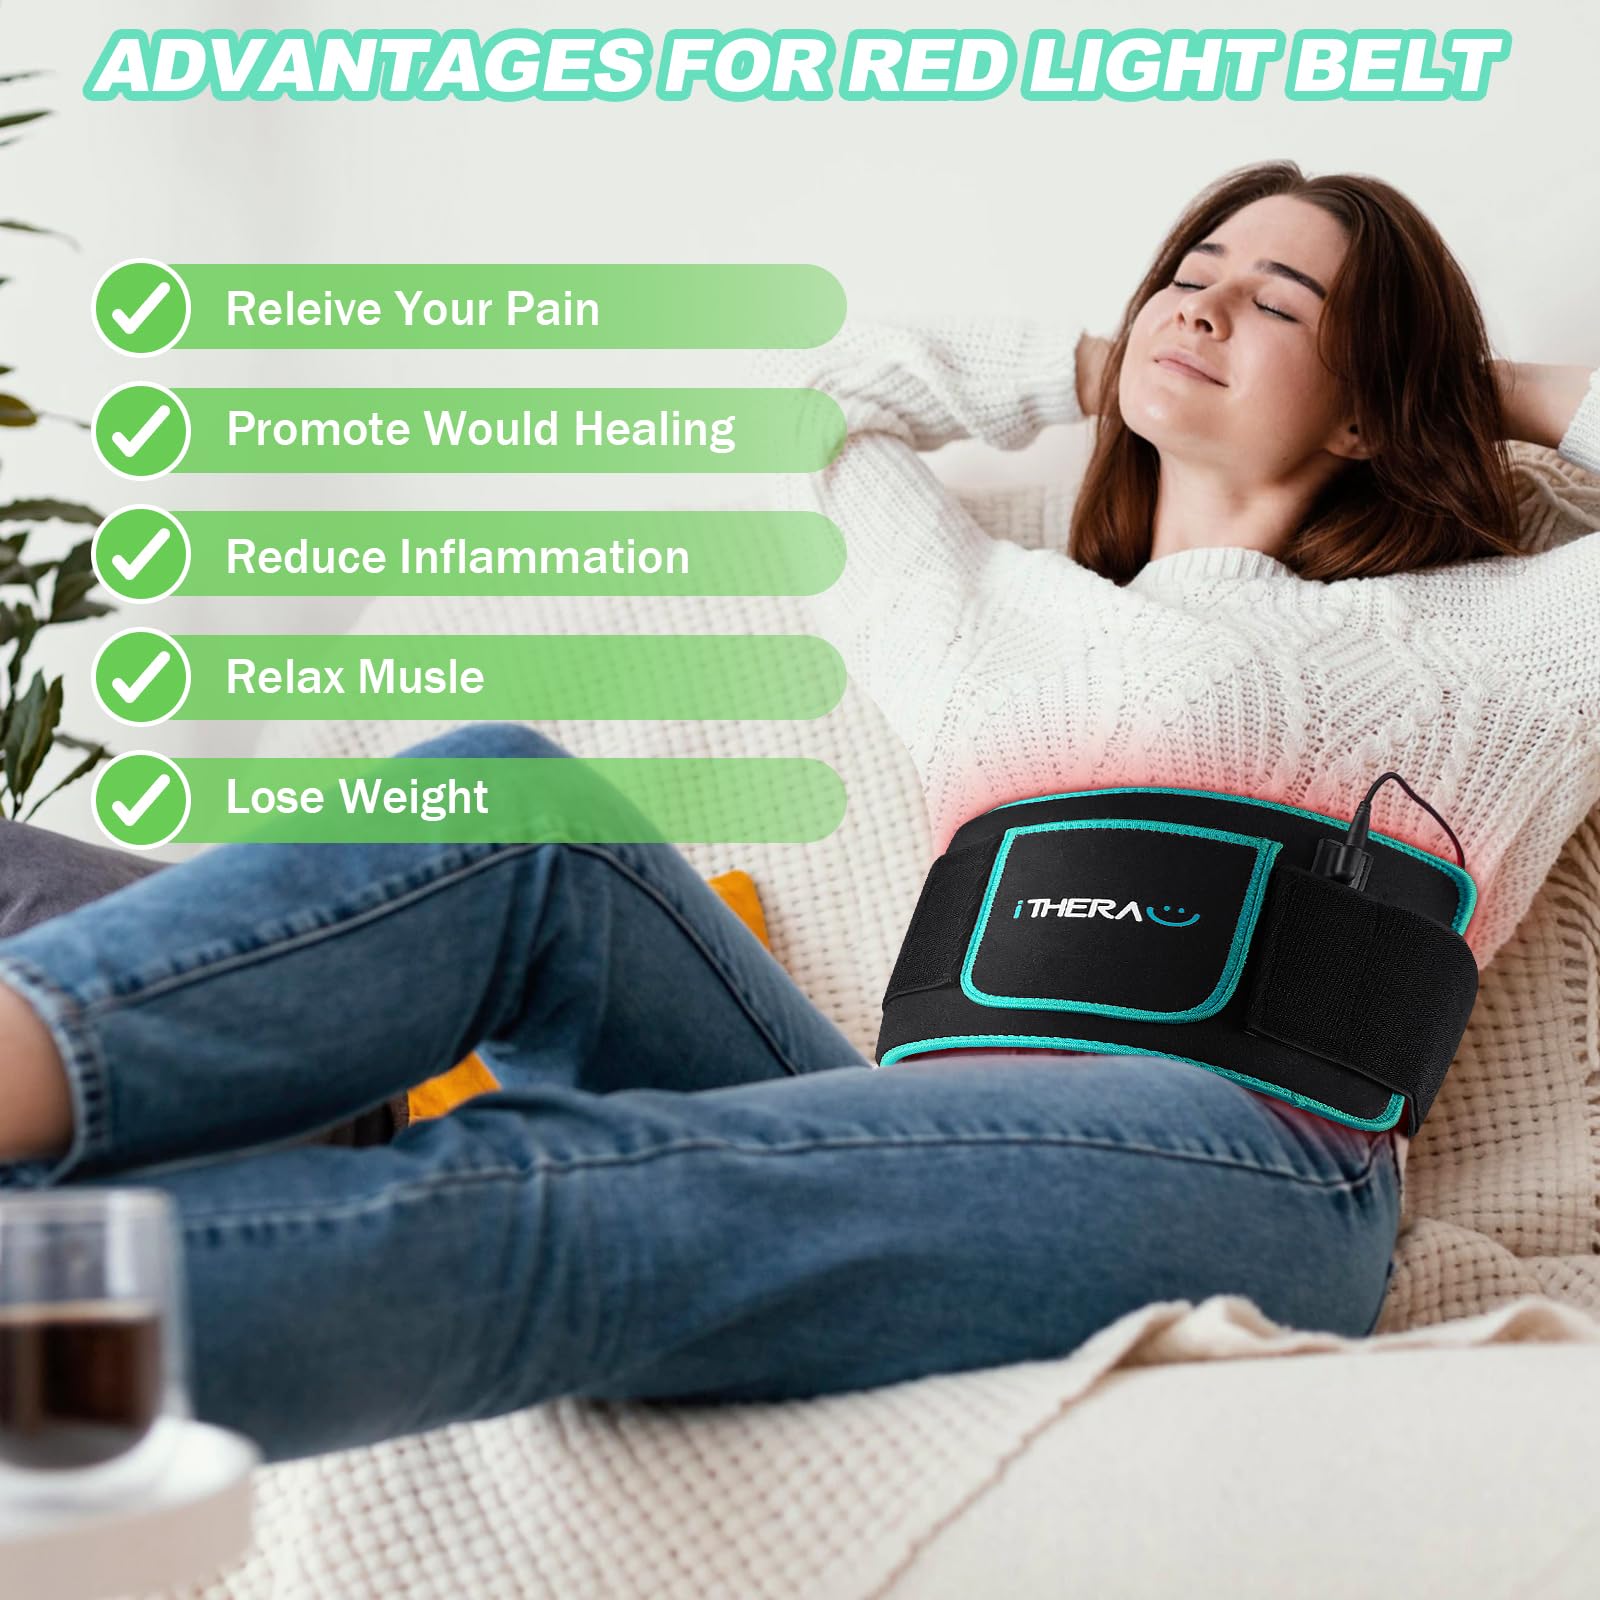 iTHERAU Red Light Therapy Belt 120LED Removable Case, Infrared Red Light Device for Body, Resolve Inflammation, Relieve Joint or Back Pain, Muscle Stiffness, Lipo Wrap for Body 660 & 850nm Wavelengths